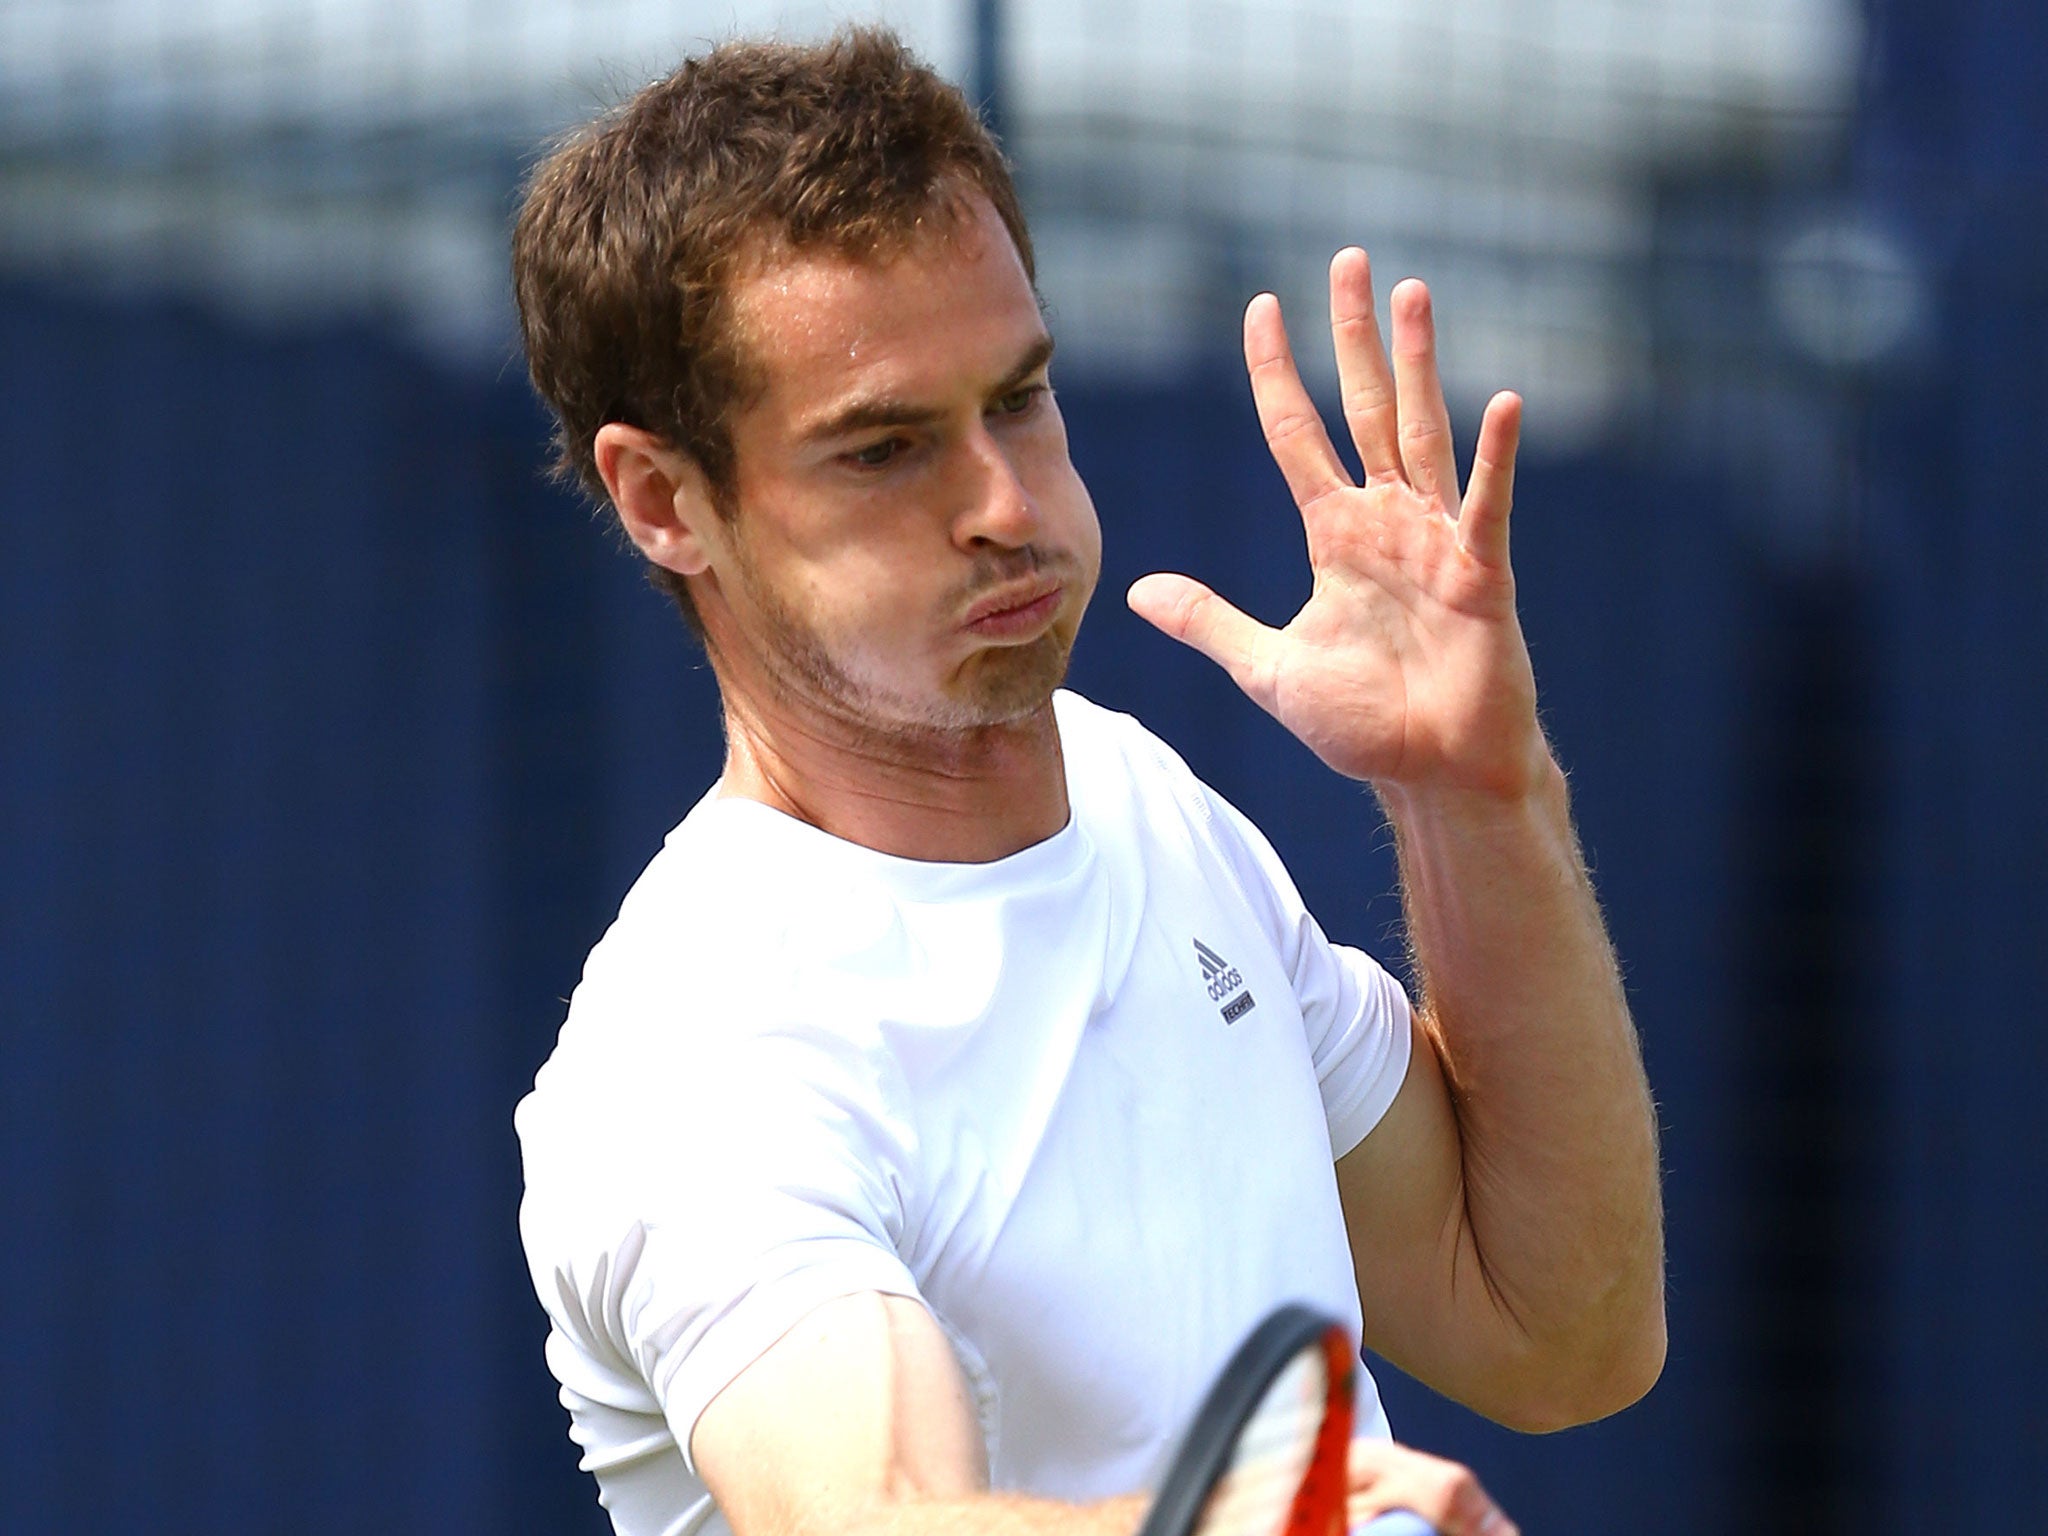 Back in action: Andy Murray starts the grass season at Queen’s this week